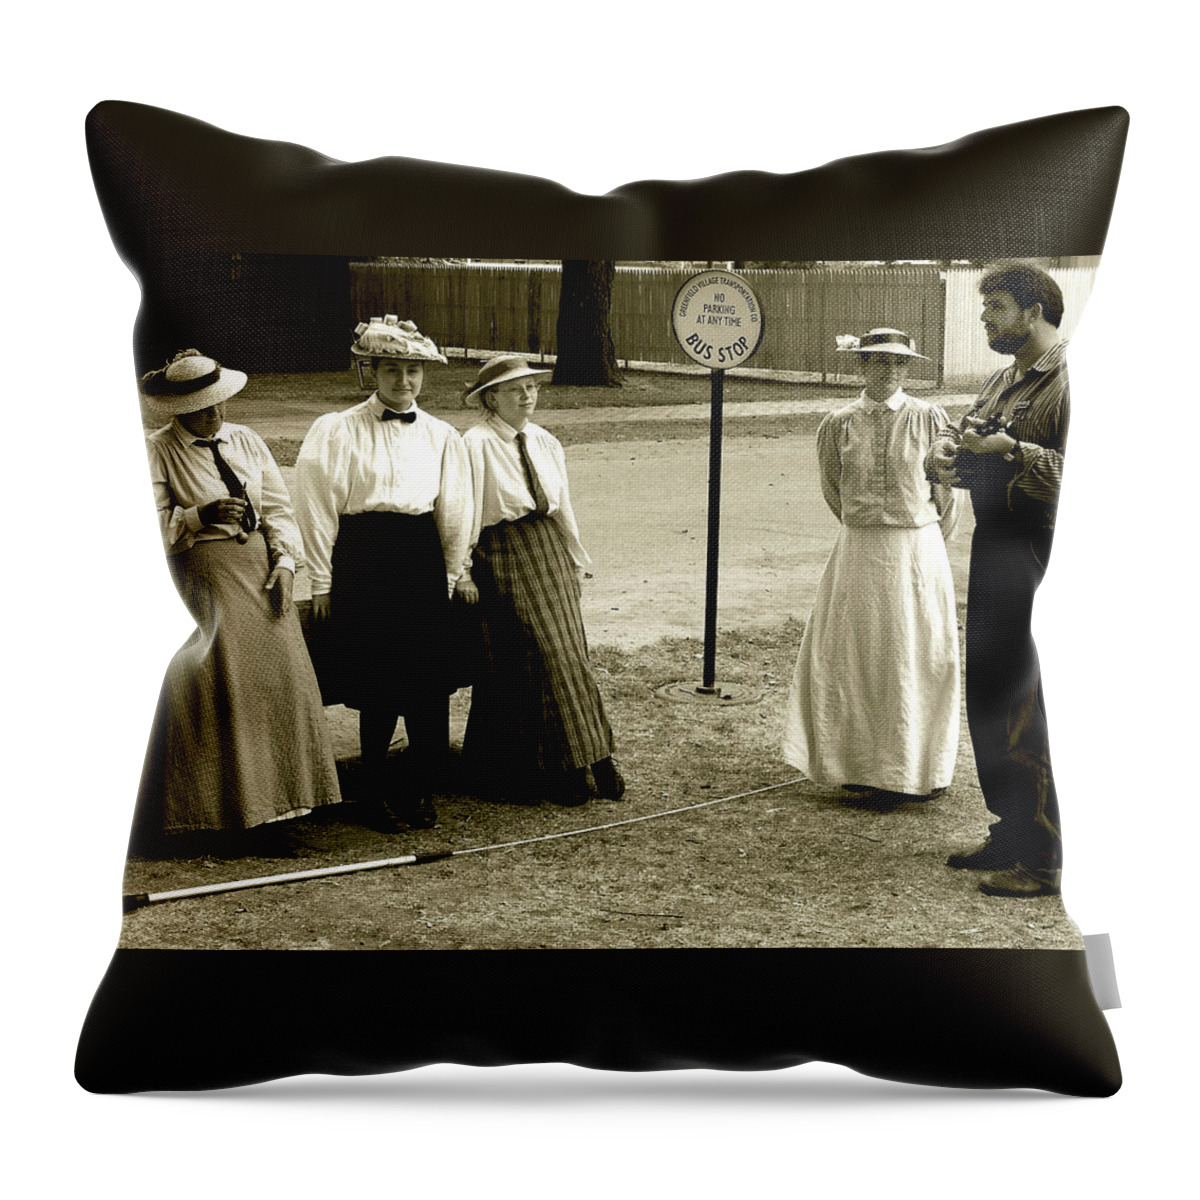  Throw Pillow featuring the photograph Bus Stop Serenade by Rein Nomm